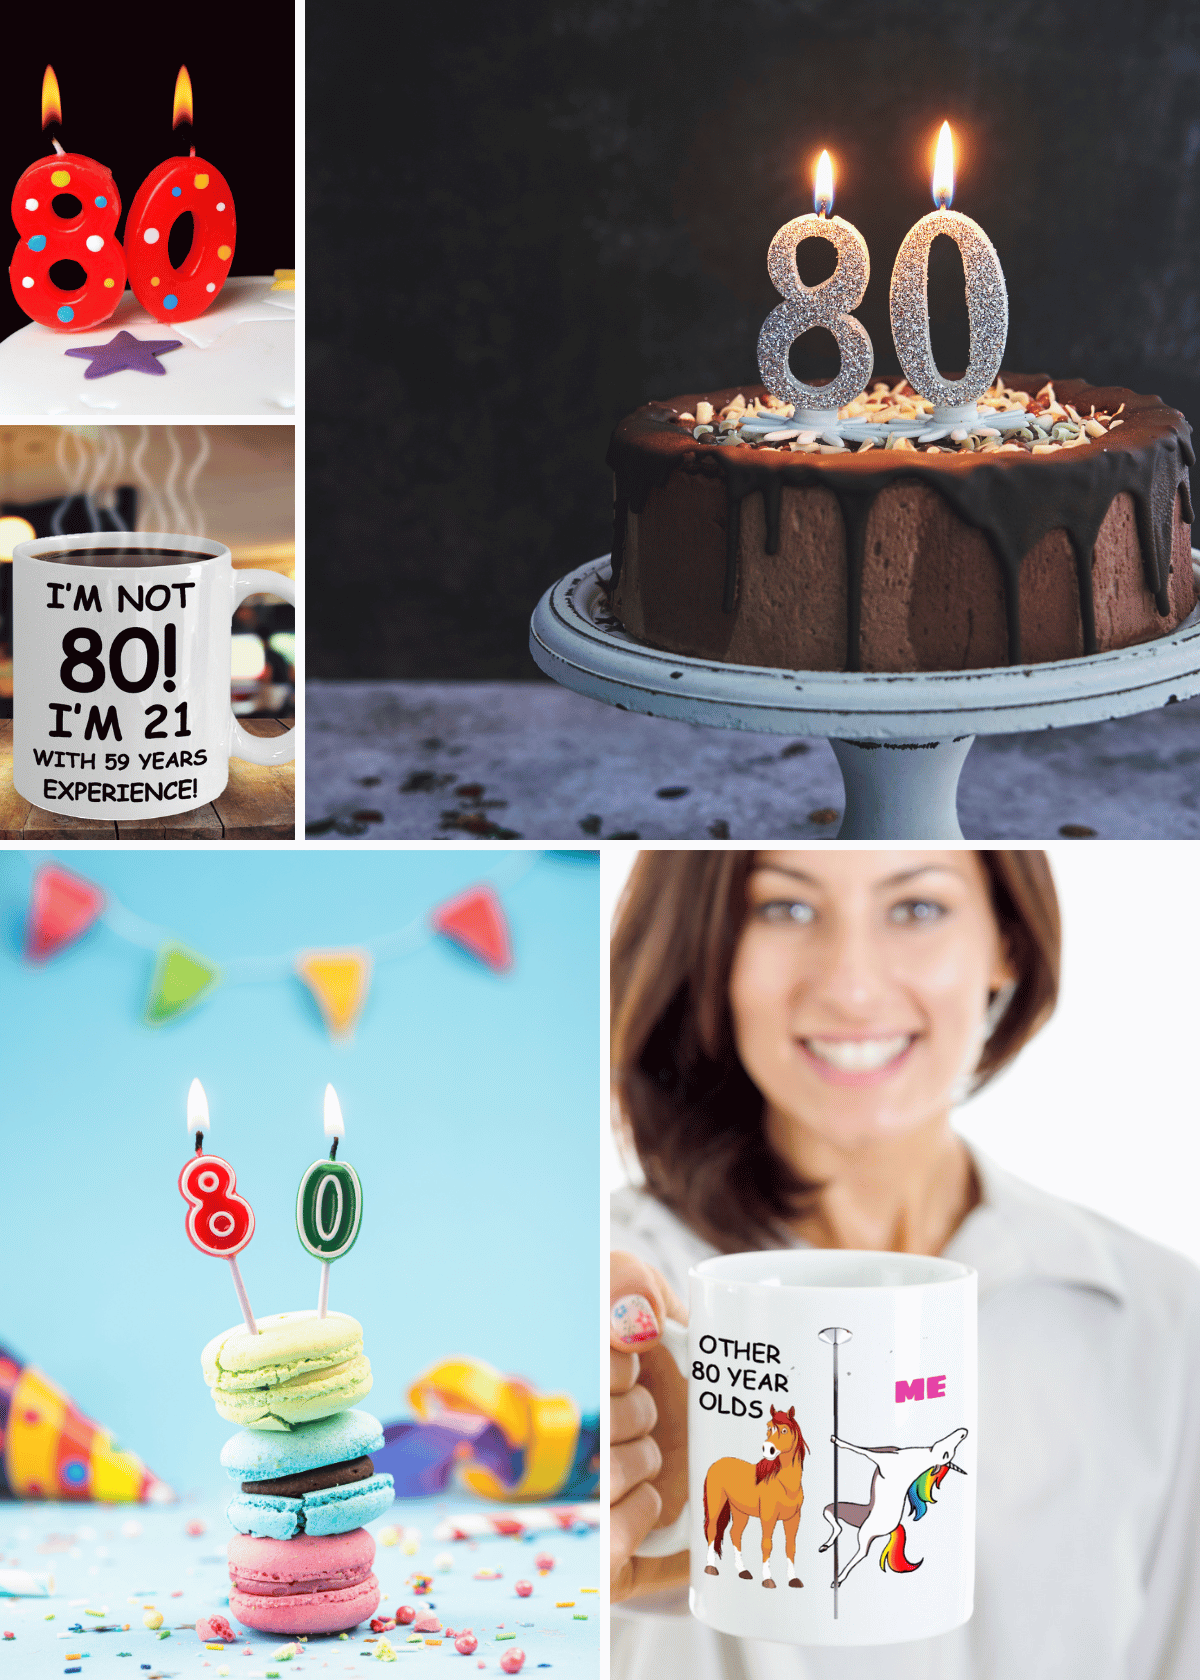 Gifts For Women: The Best Options For An 80th Birthday